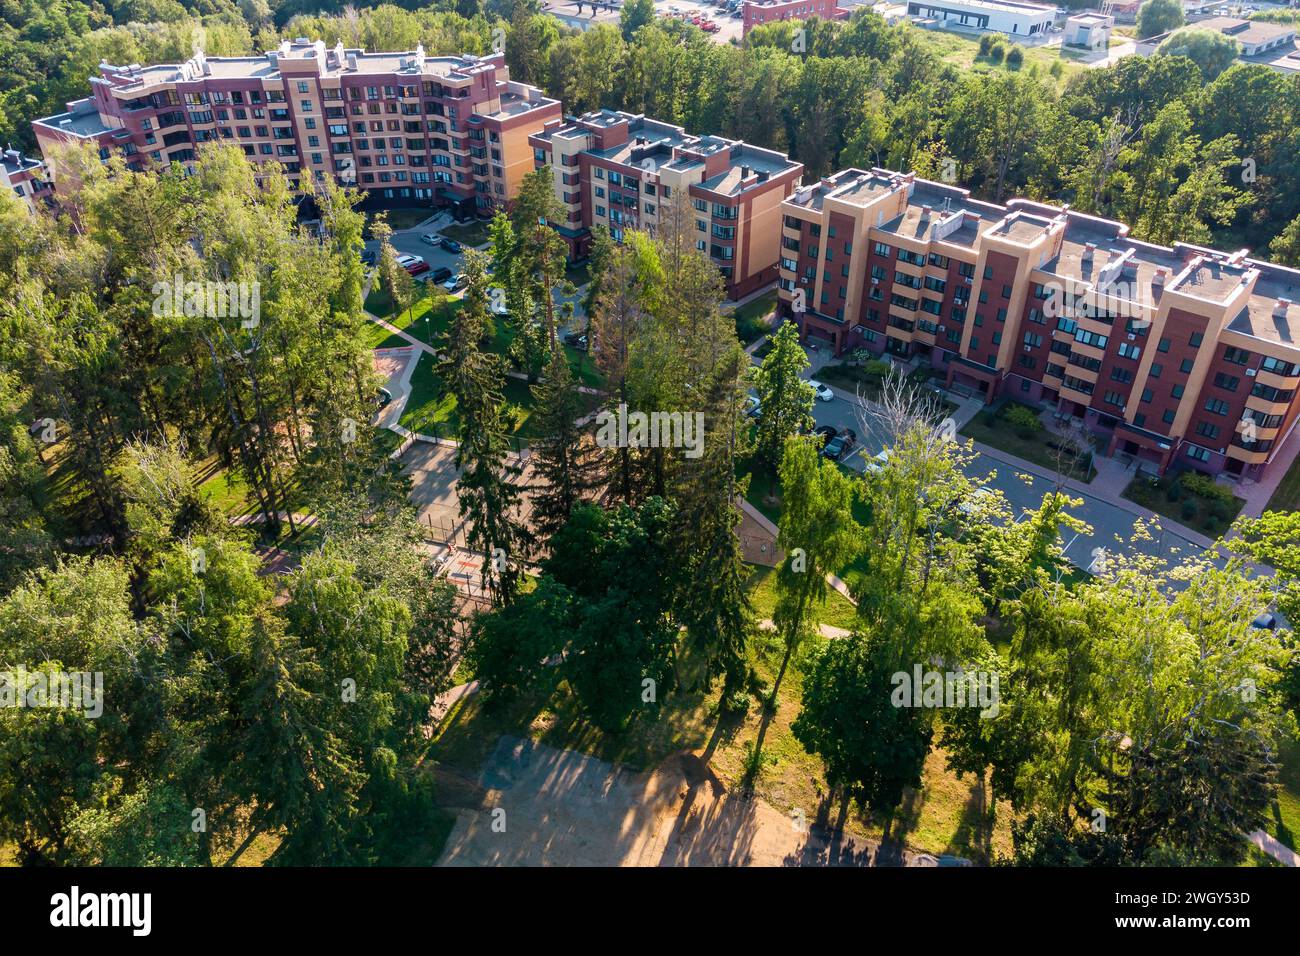 Aerial view of a park area inside a residential development Stock Photo